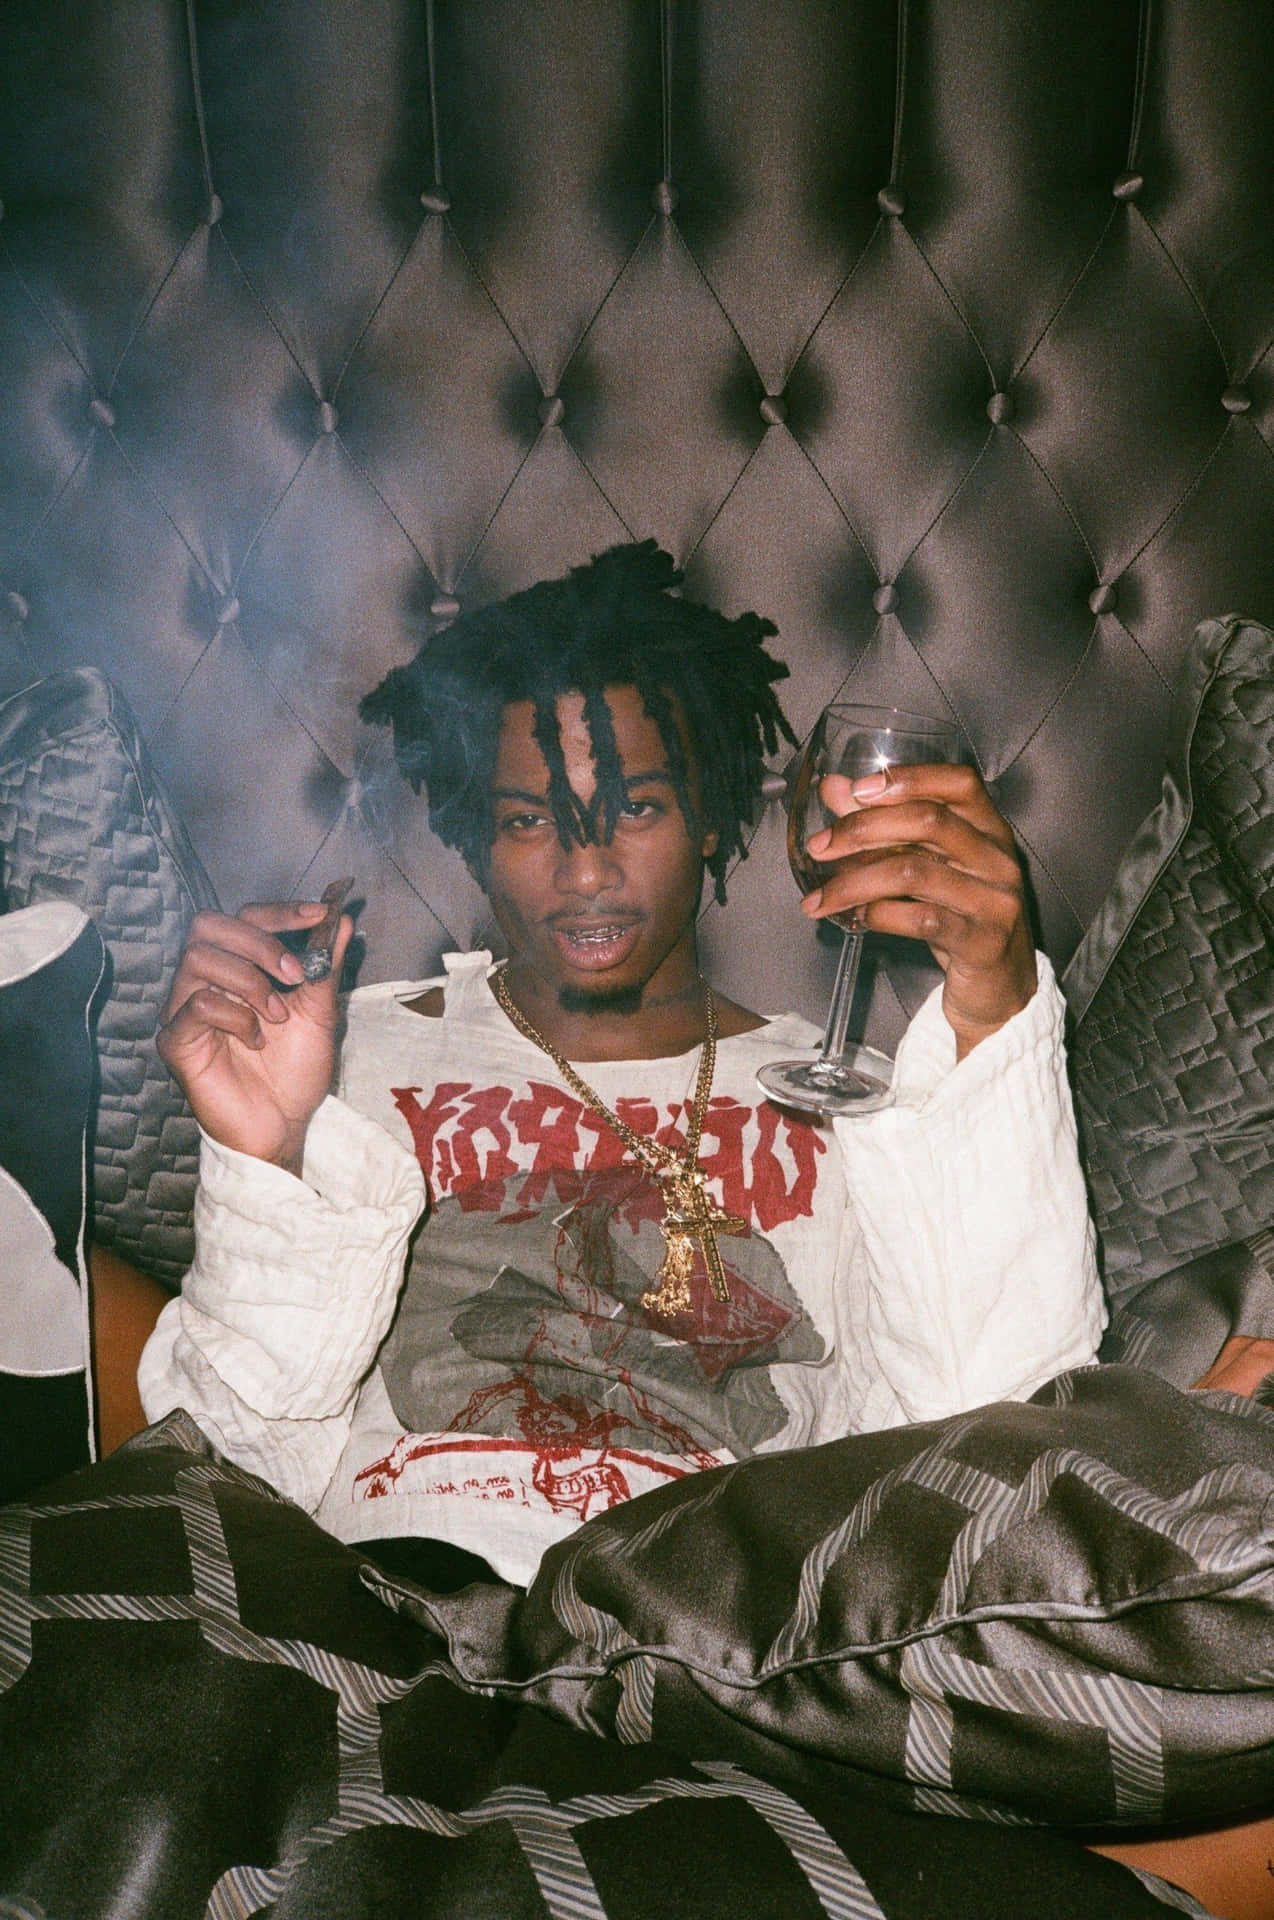 Download Playboi Carti: Bringing the Heat to Your iPhone Wallpaper